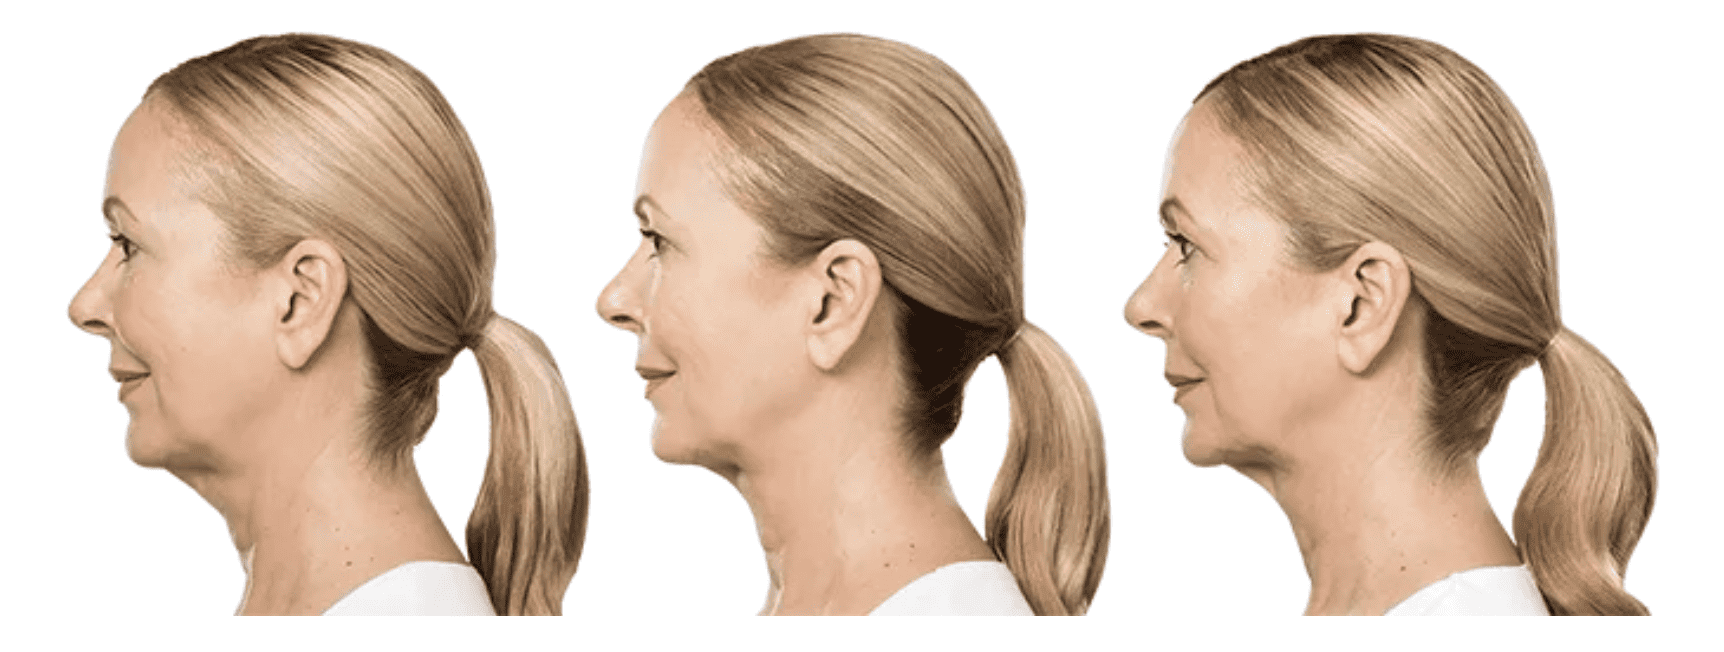 Before and after photos of Kybella treatments.